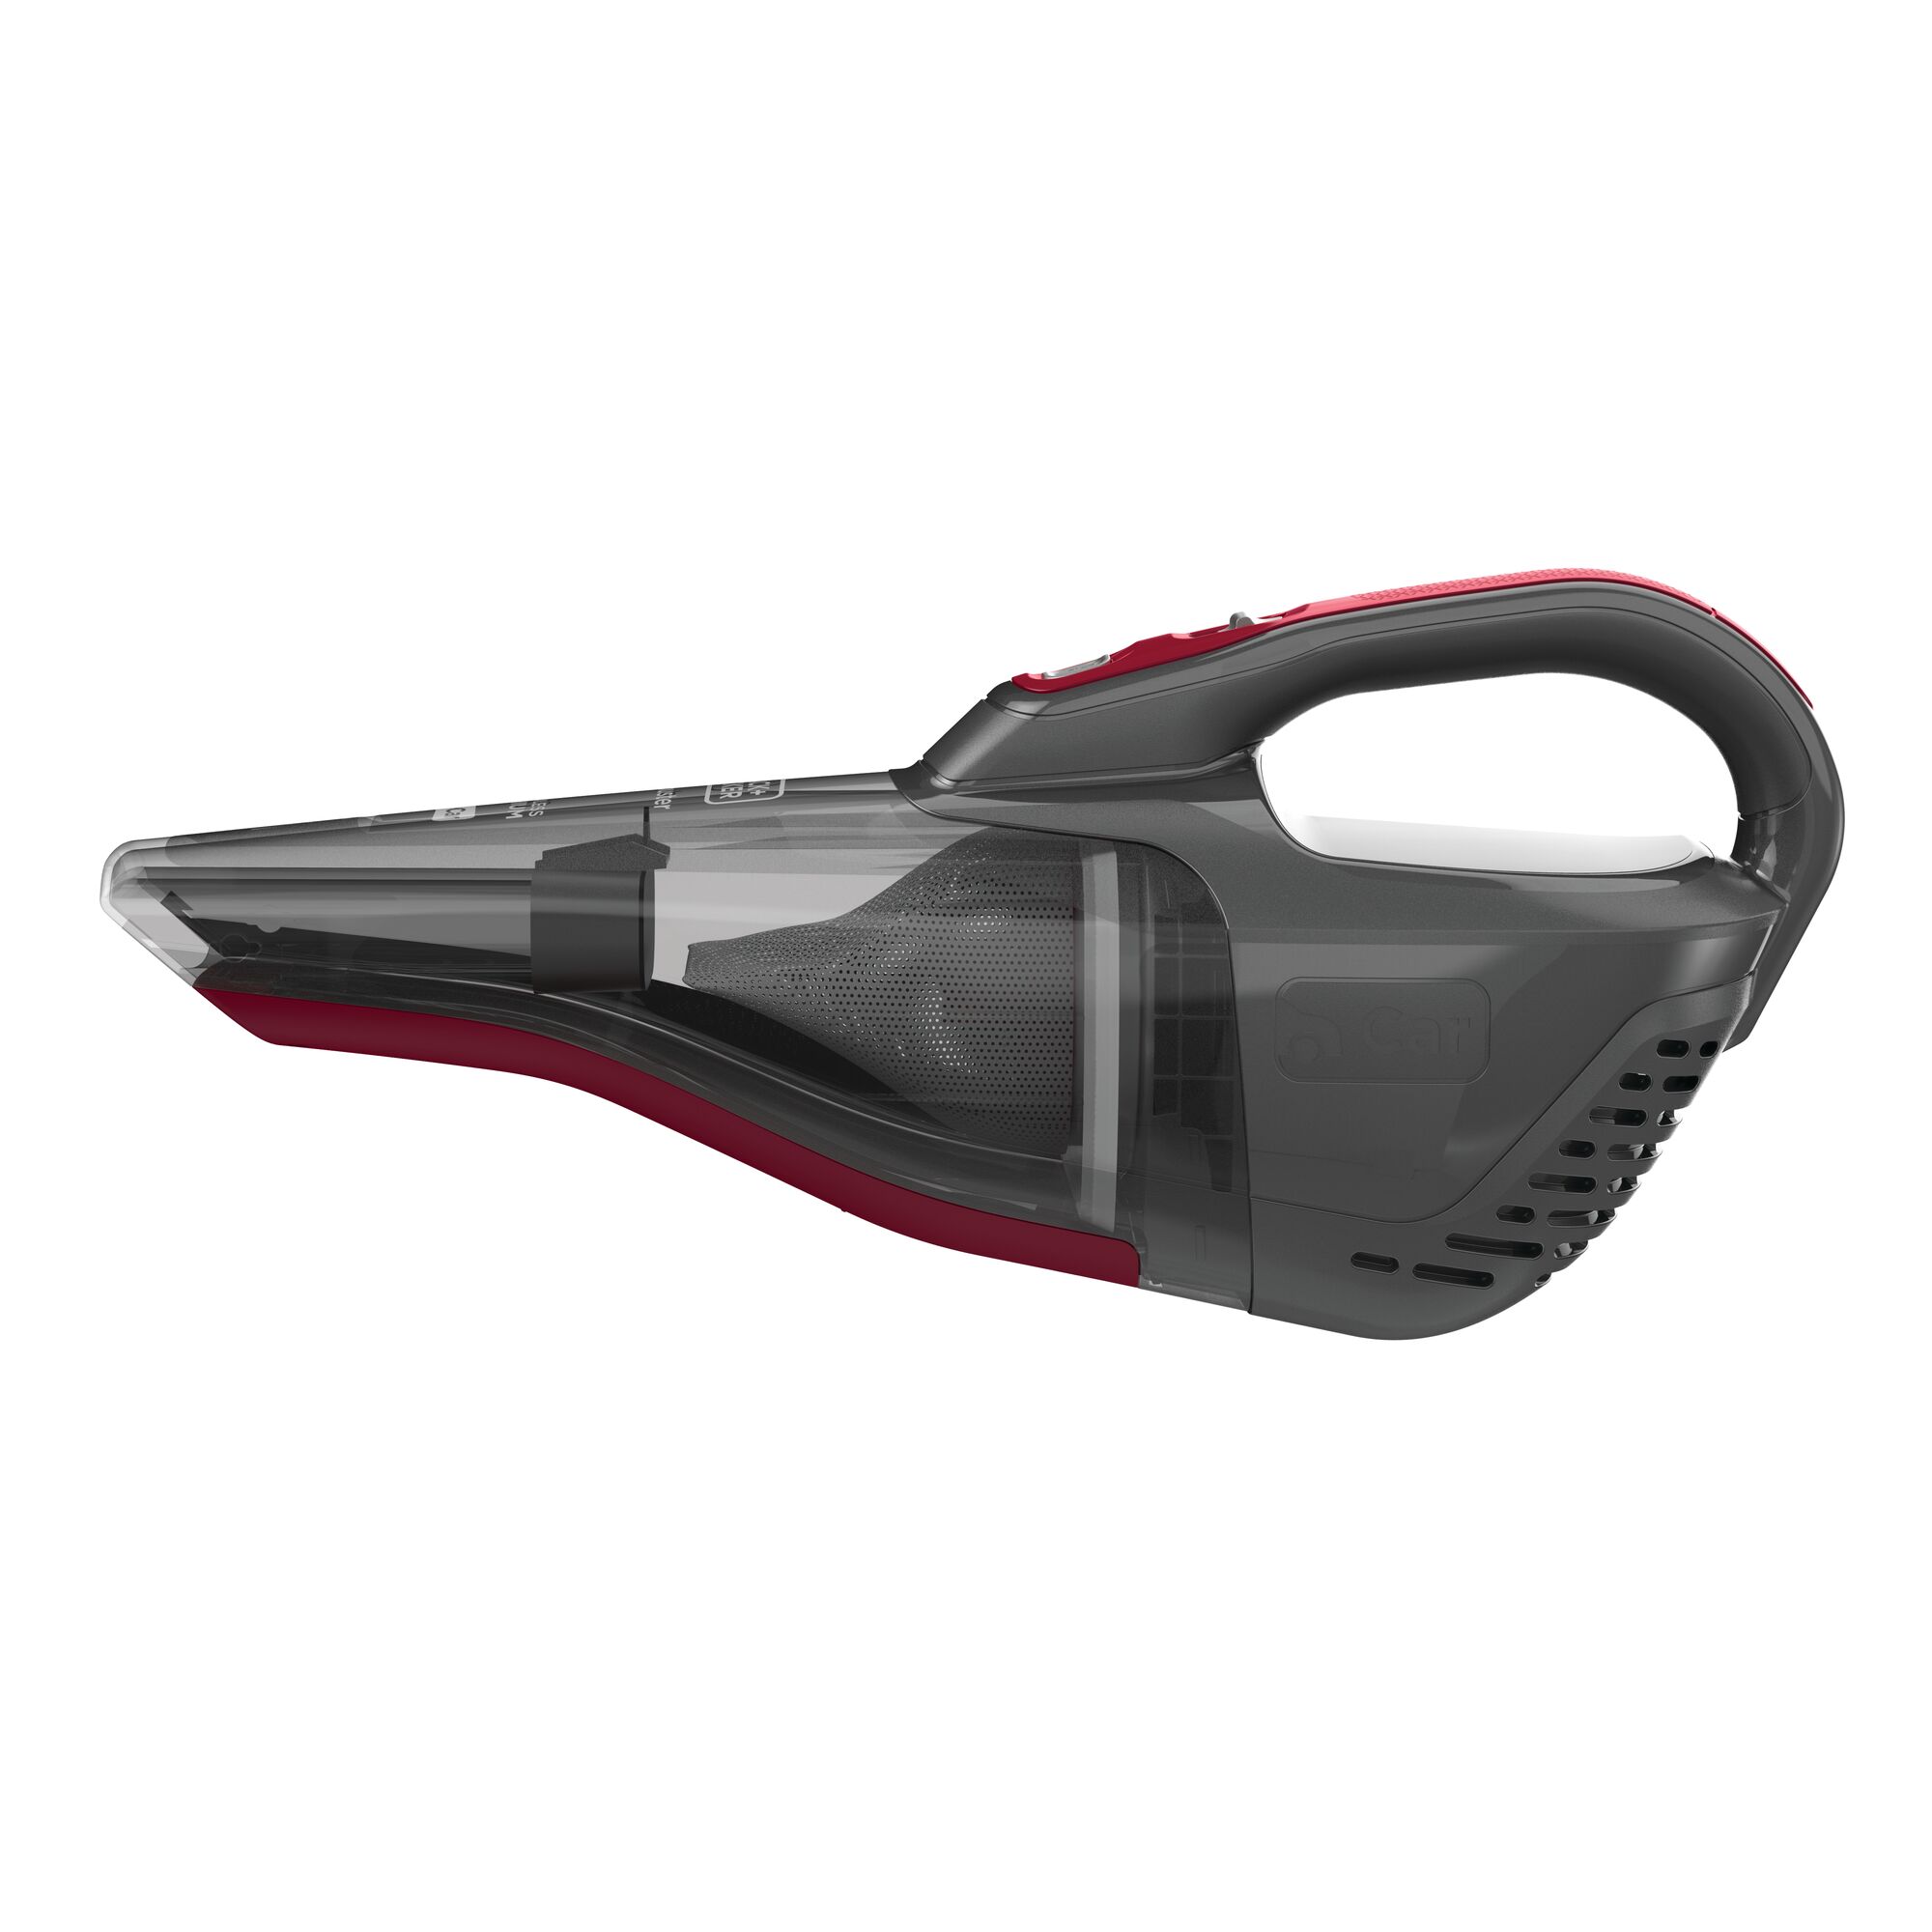 Dustbuster quick clean car cordless hand vacuum with motorized upholstery brush.